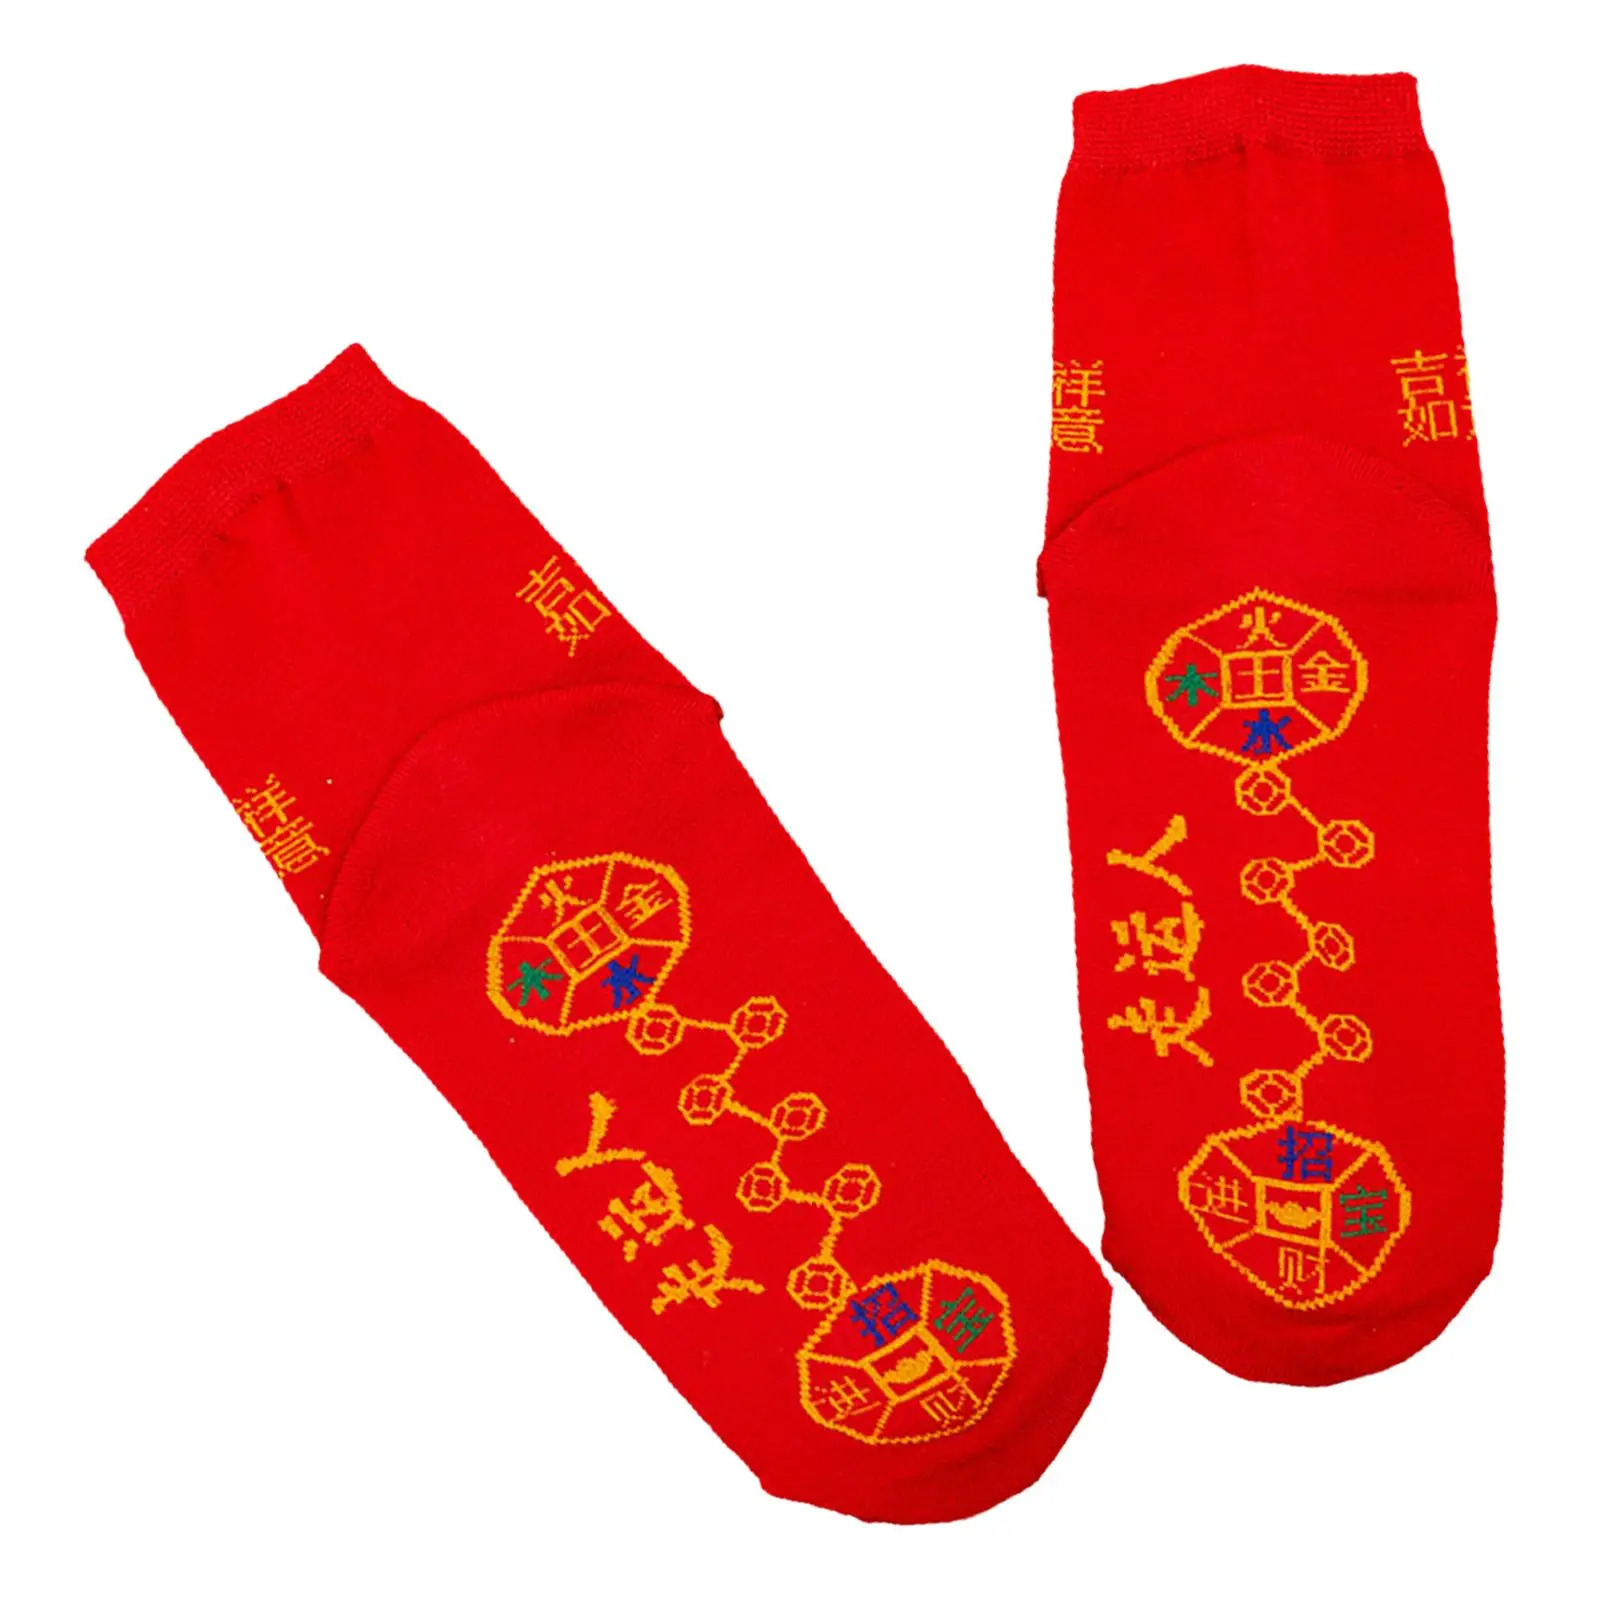 

Chinese Lunar New Year Red Socks Funny with Chinese Cultural Characteristics Spring Festival Socks